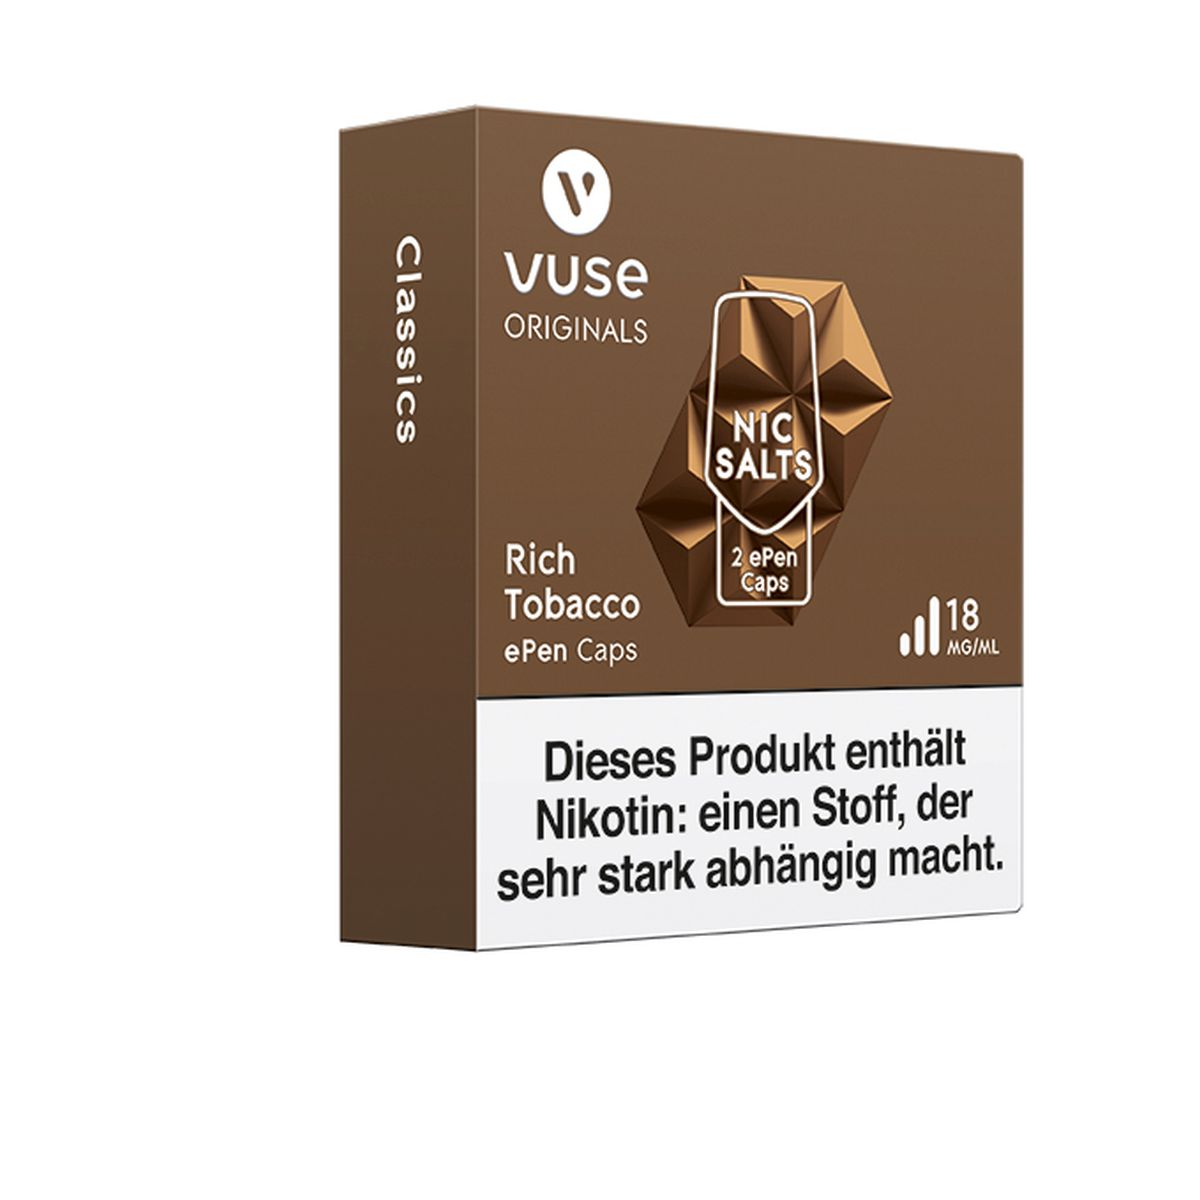 Vuse Vuse ePen Caps Rich Tobacco Nic Salts 18mg Nikotin 2ml bei www.Tabakring.de kaufen